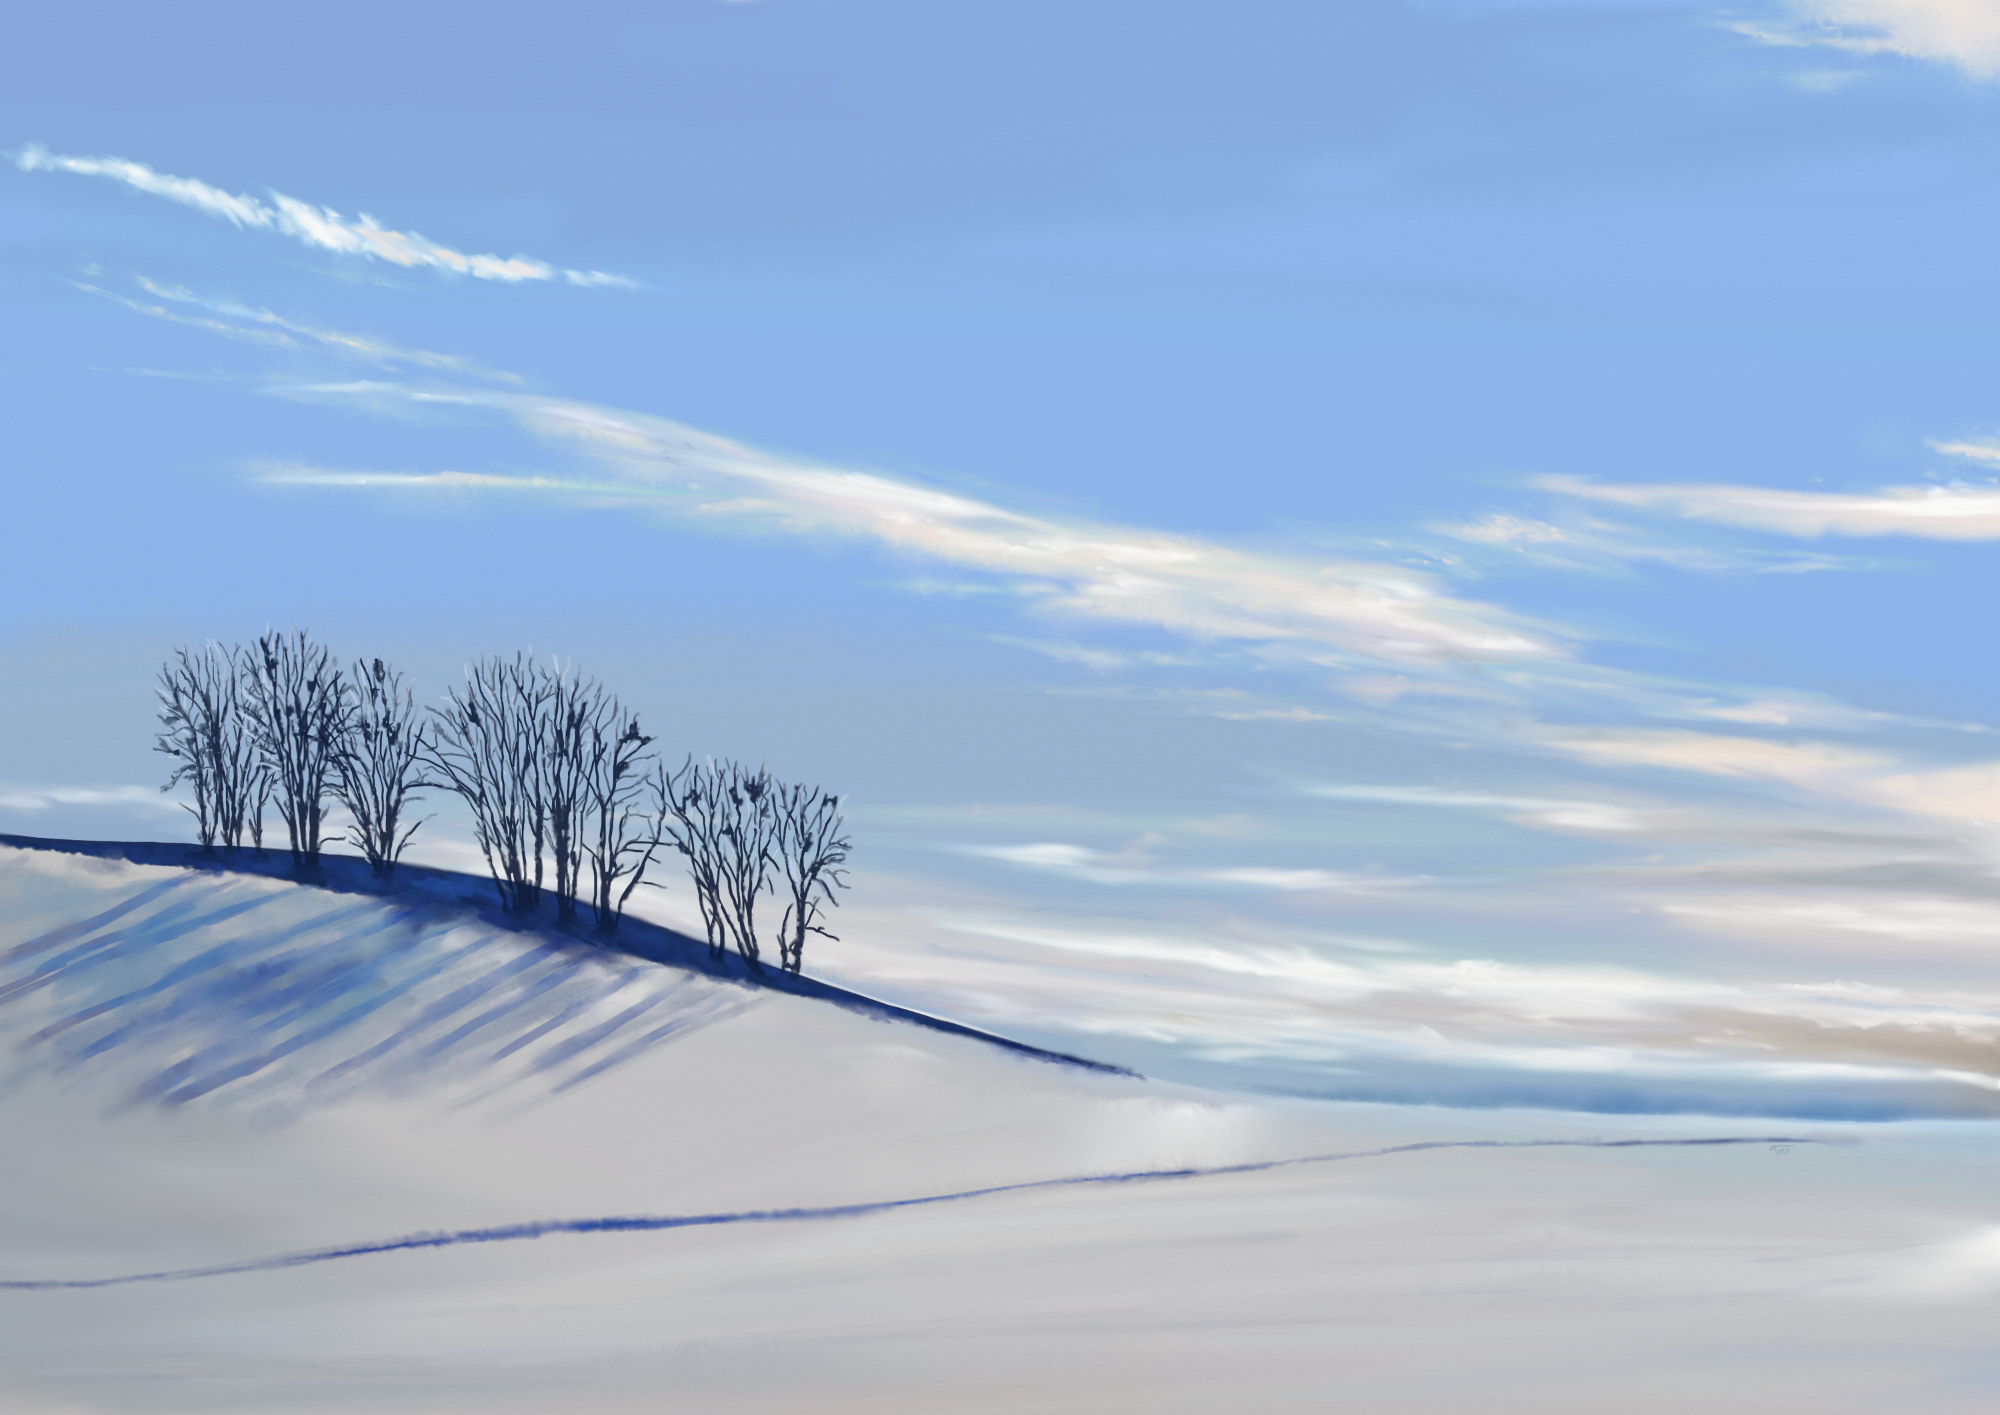 Digital watercolor painting of a sunny winter landscape